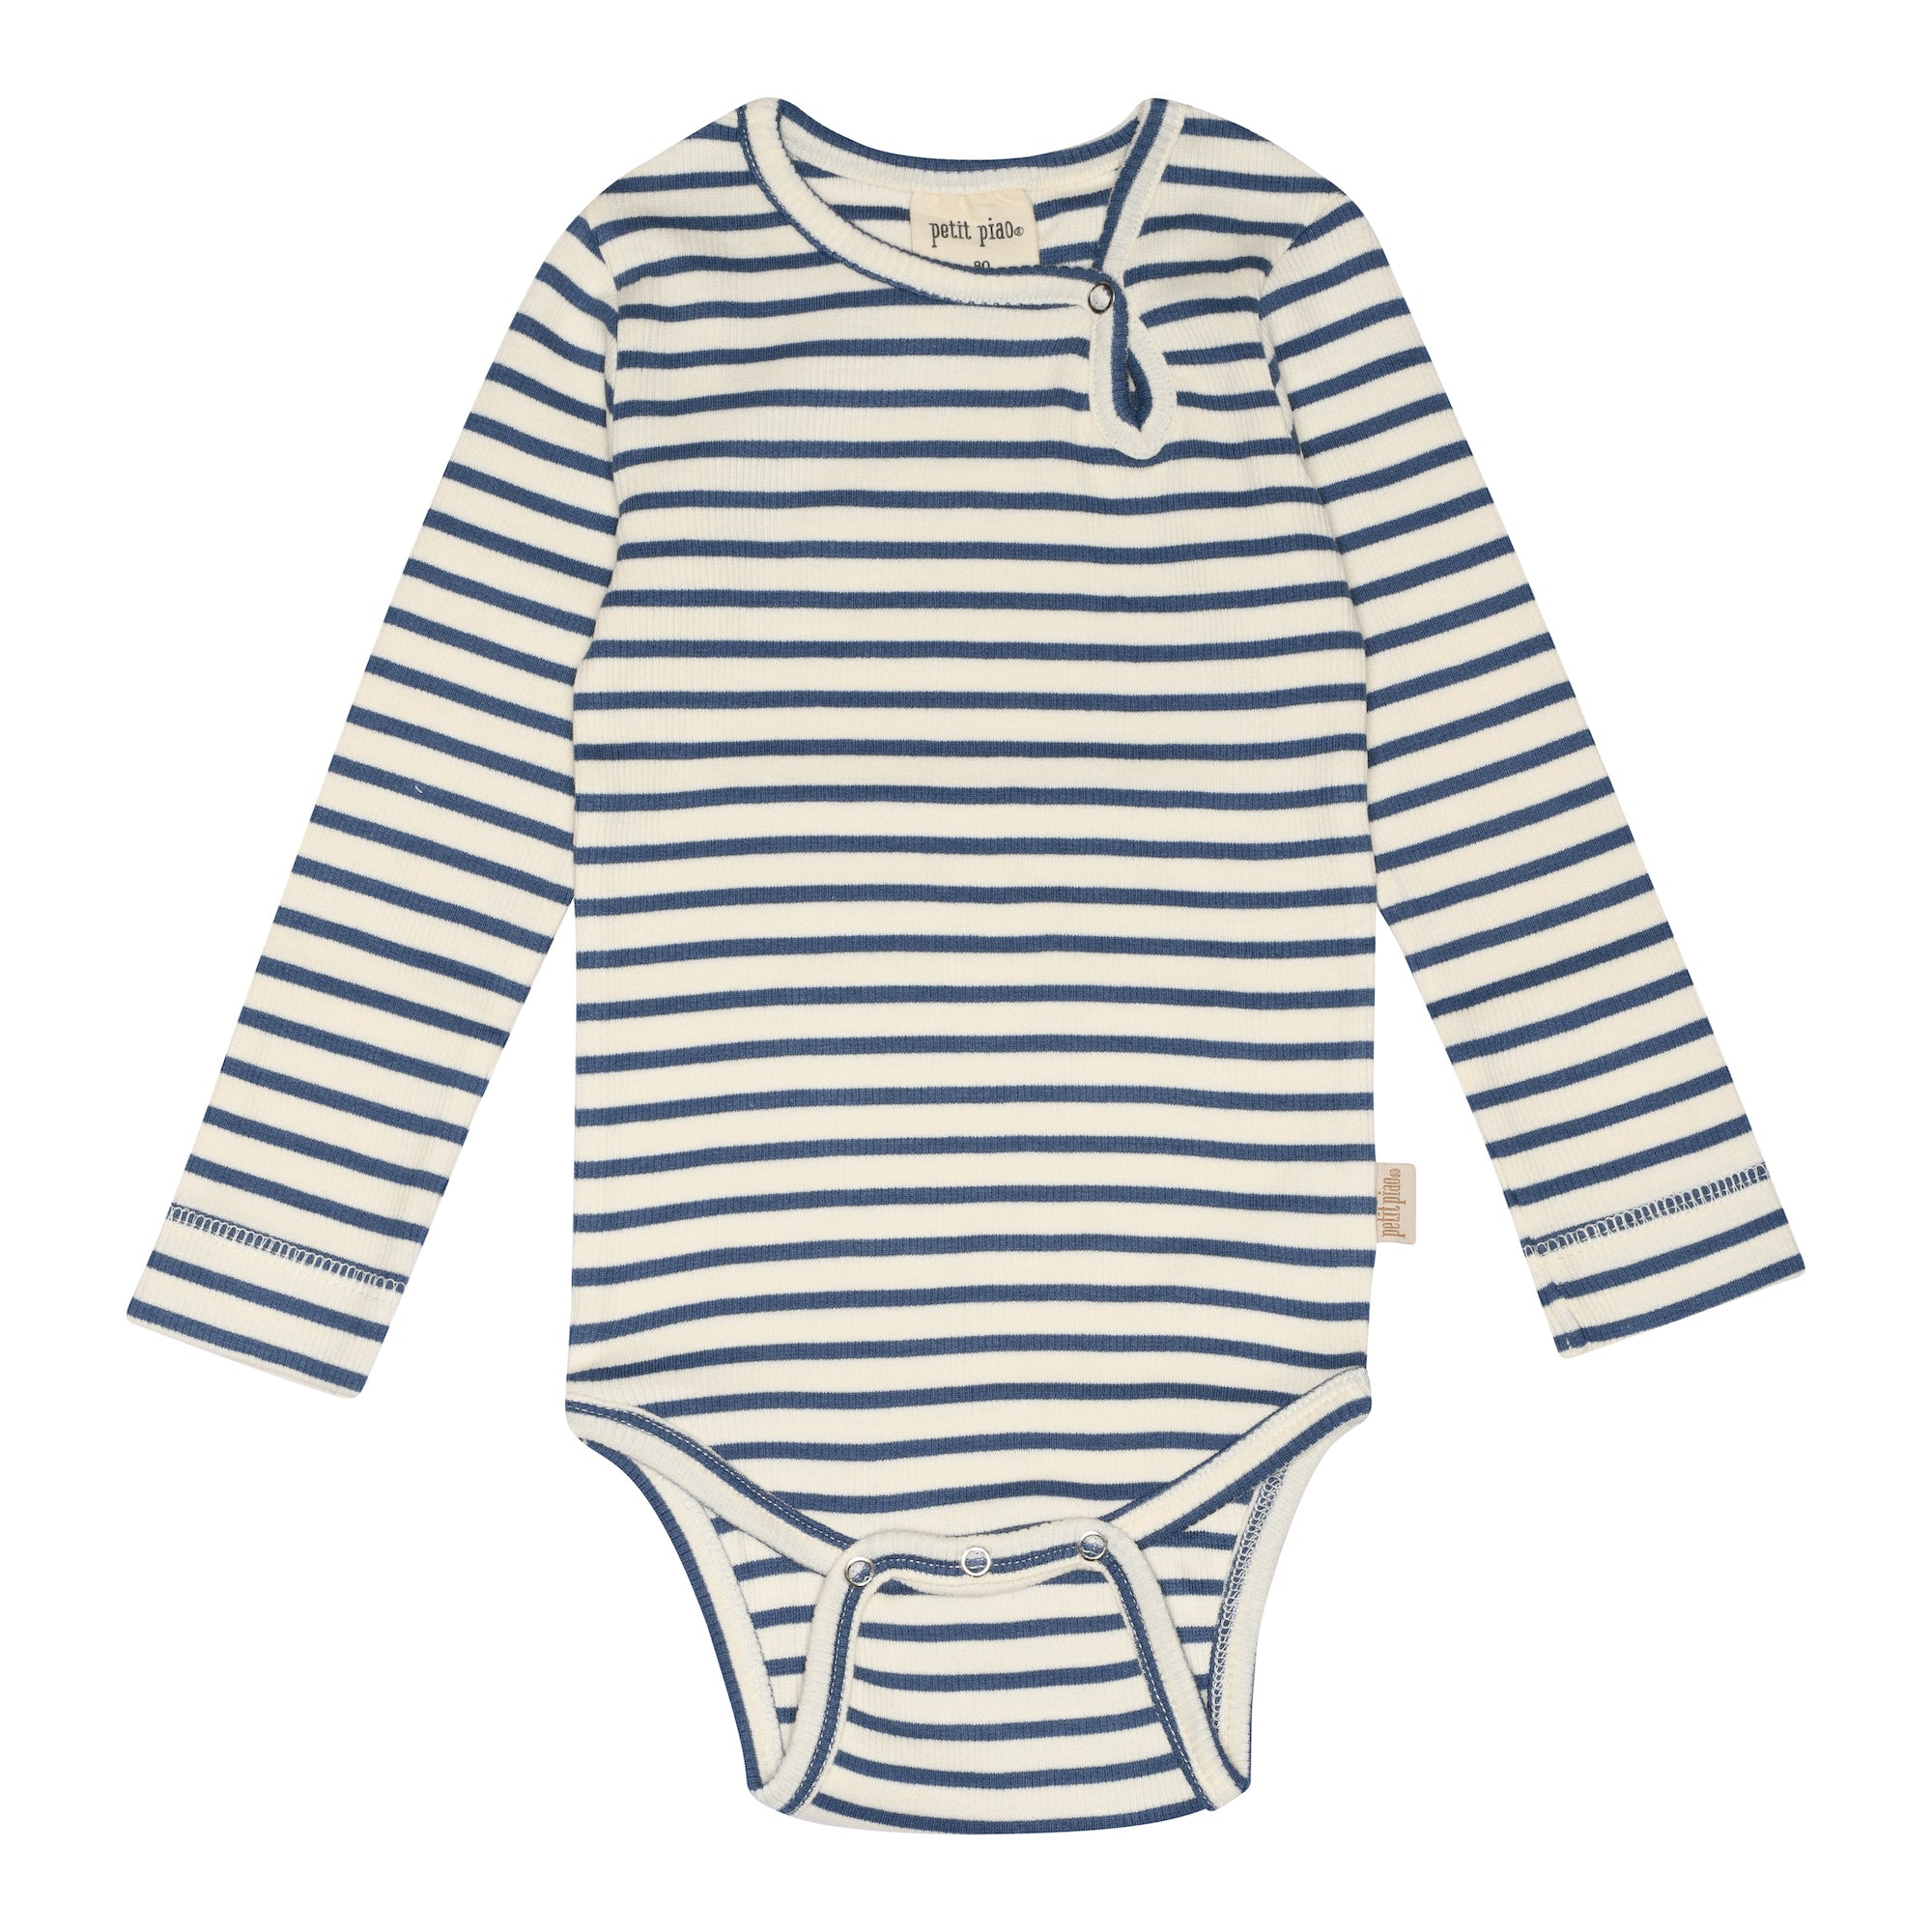 Petit Piao - Body LS Modal Striped, PP301 - Moonlight Blue / Offwhite